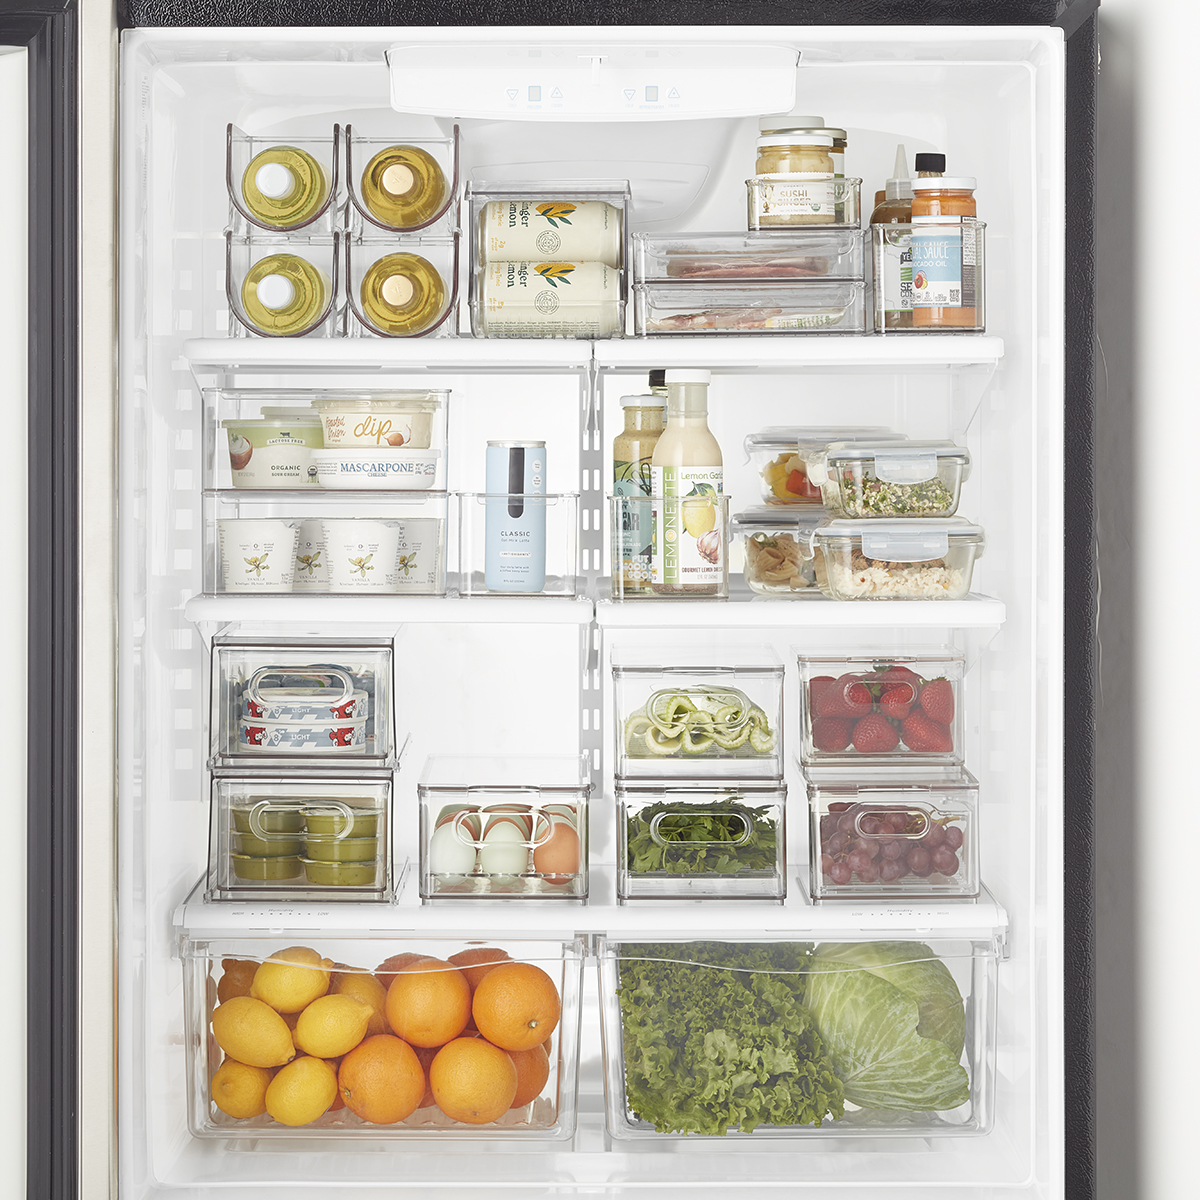 AINIM Refrigerator Drawers Orgainzer, Divided Fridge Drawer, Pull-Out  Fridge Drawer Organizer with Divided Sections, Organization and Storage Box  Fit